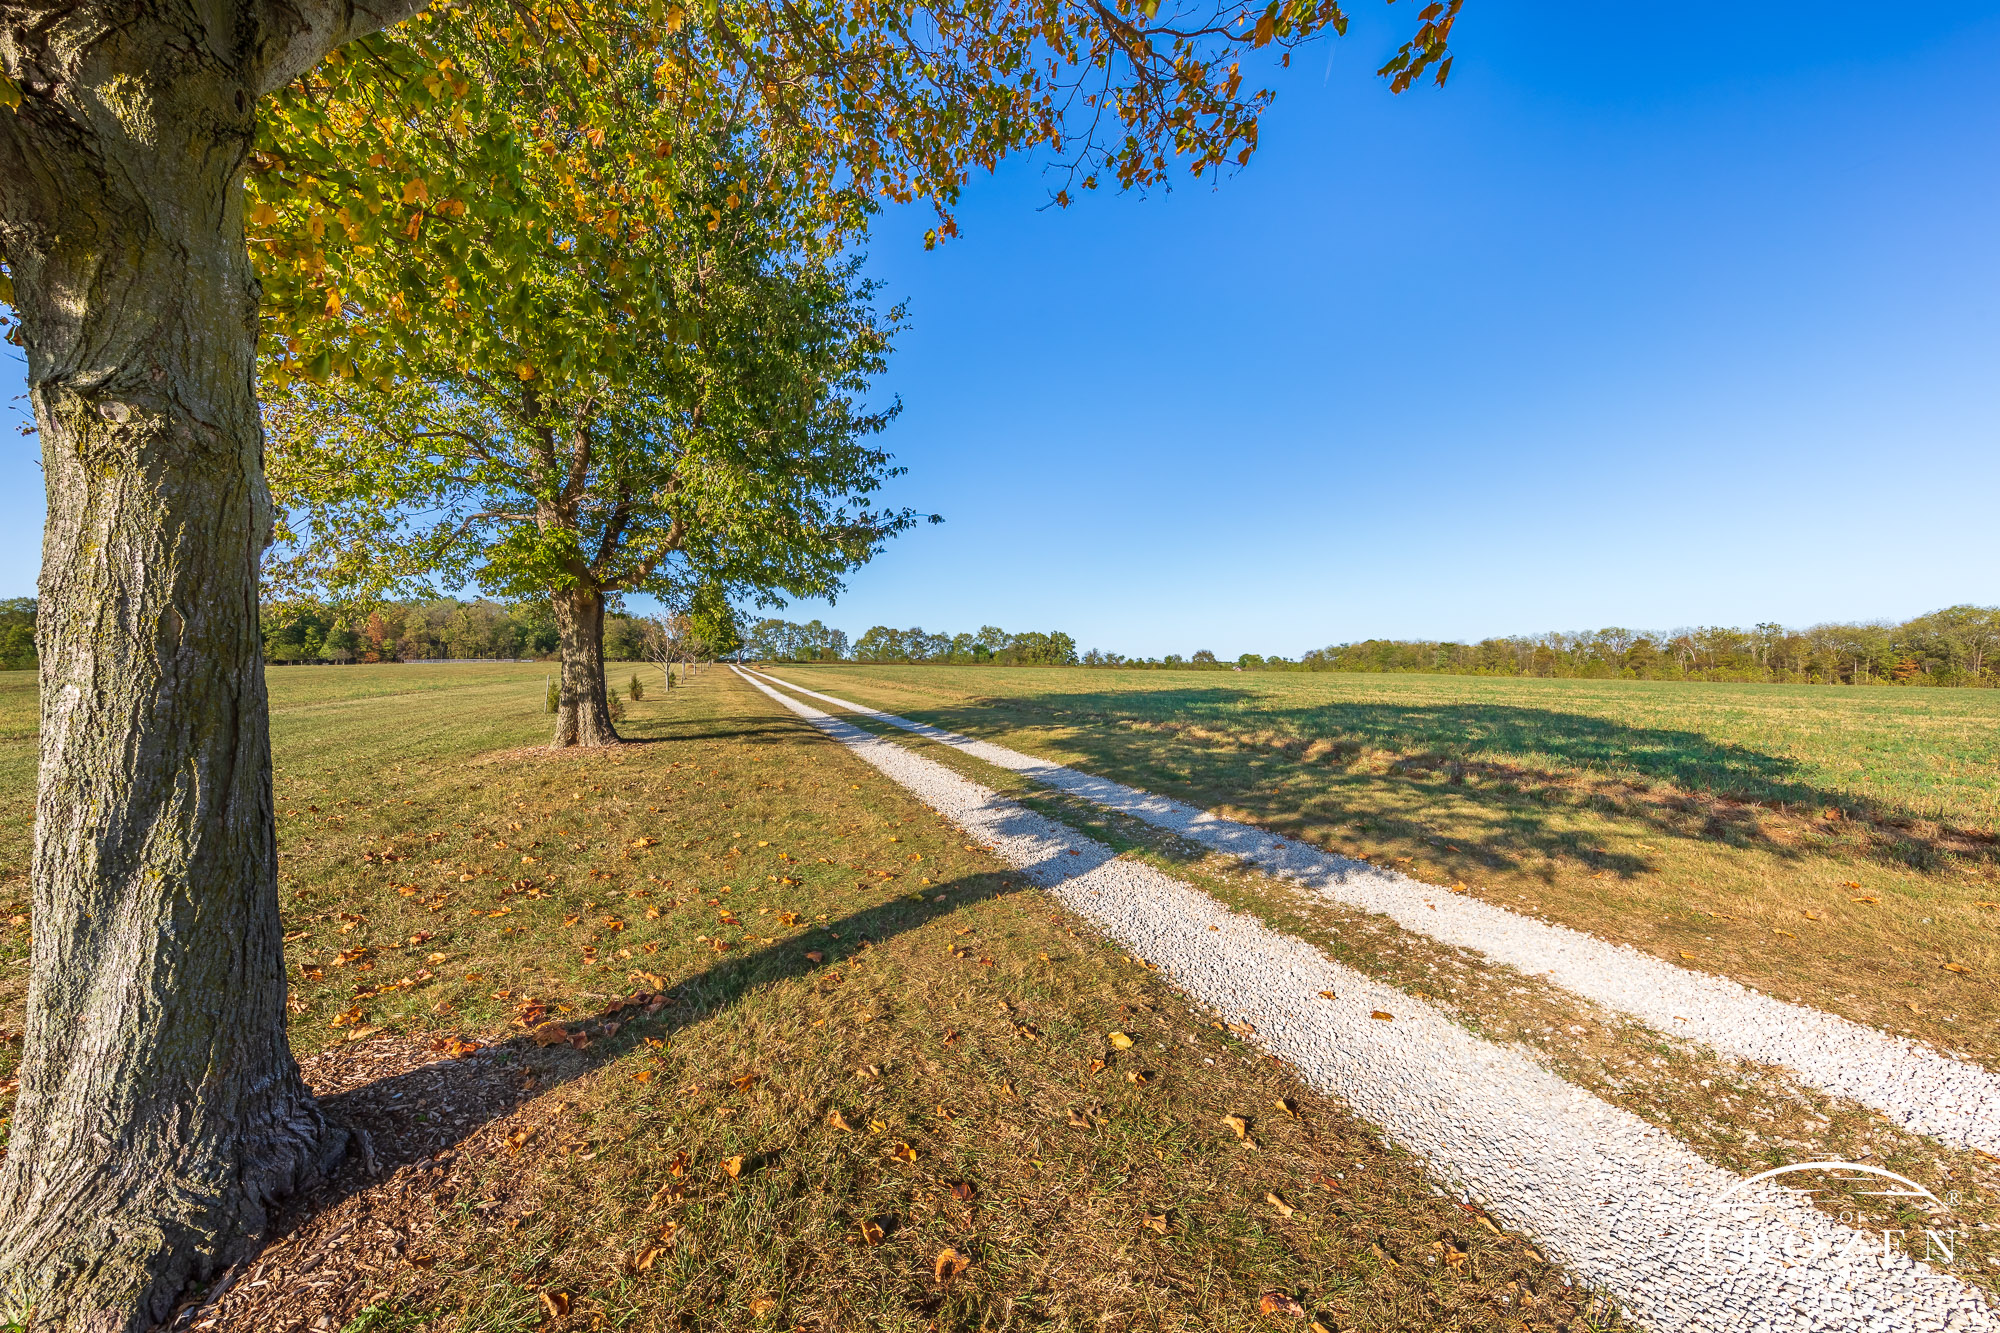 A country lane leads that the eye to the distant horizon while presenting the viewer autumn composition of changing leaves under blue skies